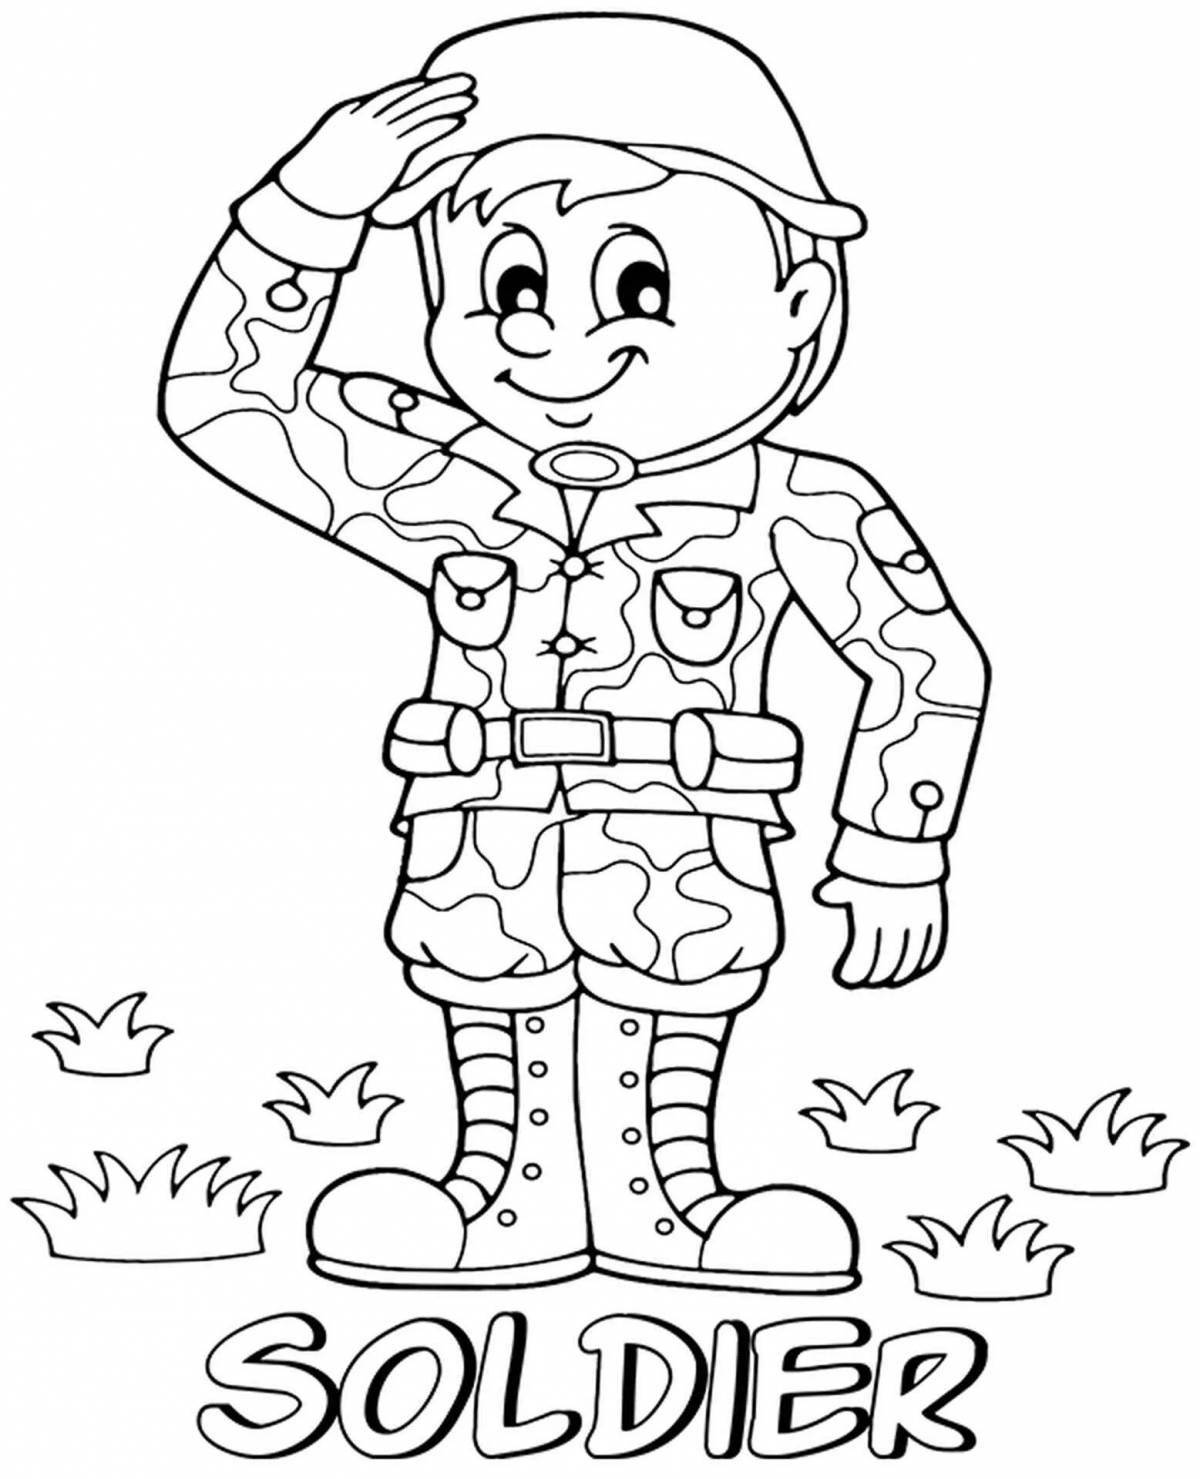 Coloring playful soldier for kids